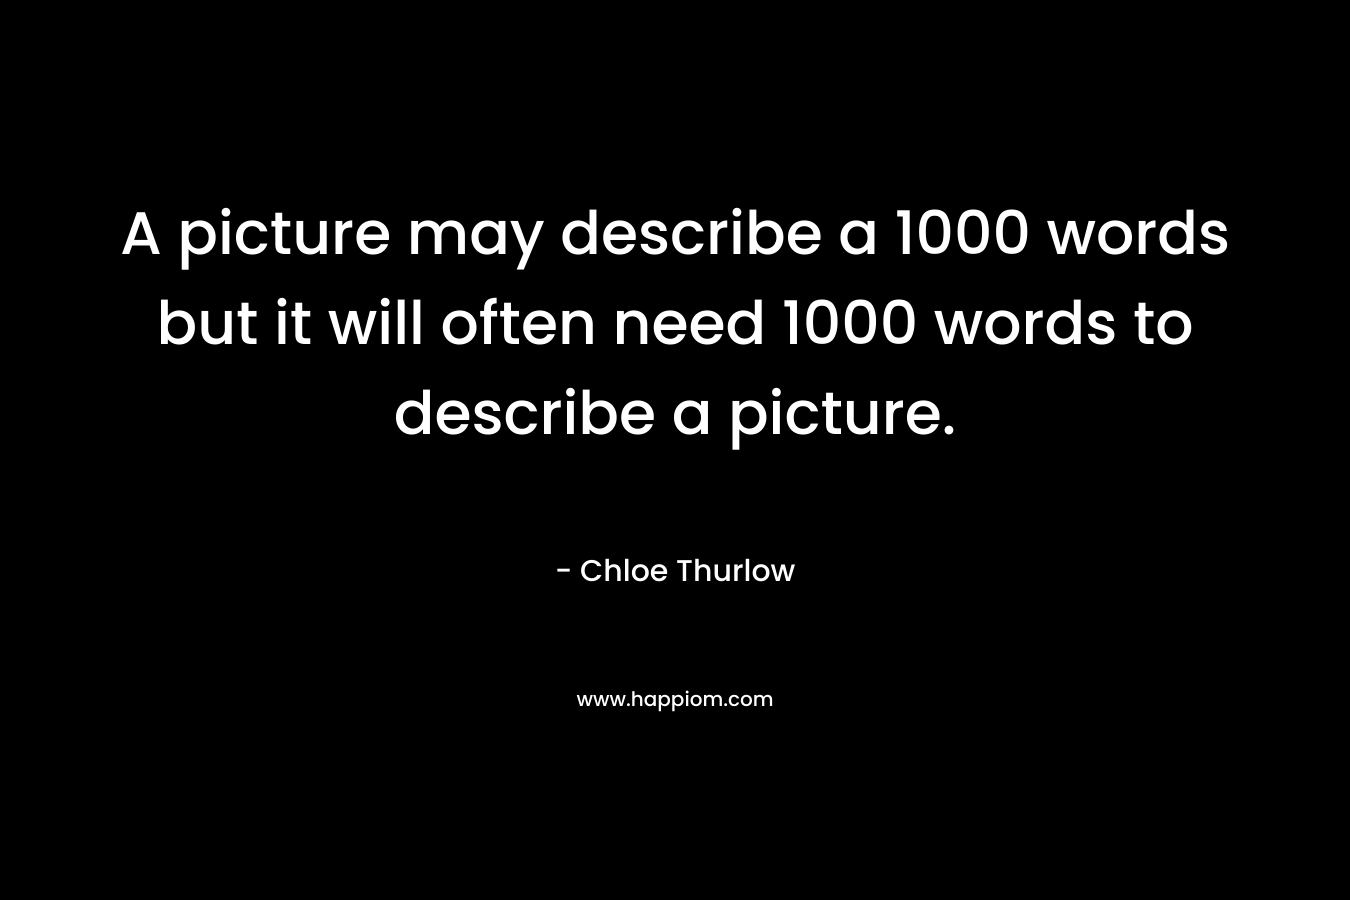 A picture may describe a 1000 words but it will often need 1000 words to describe a picture. – Chloe Thurlow